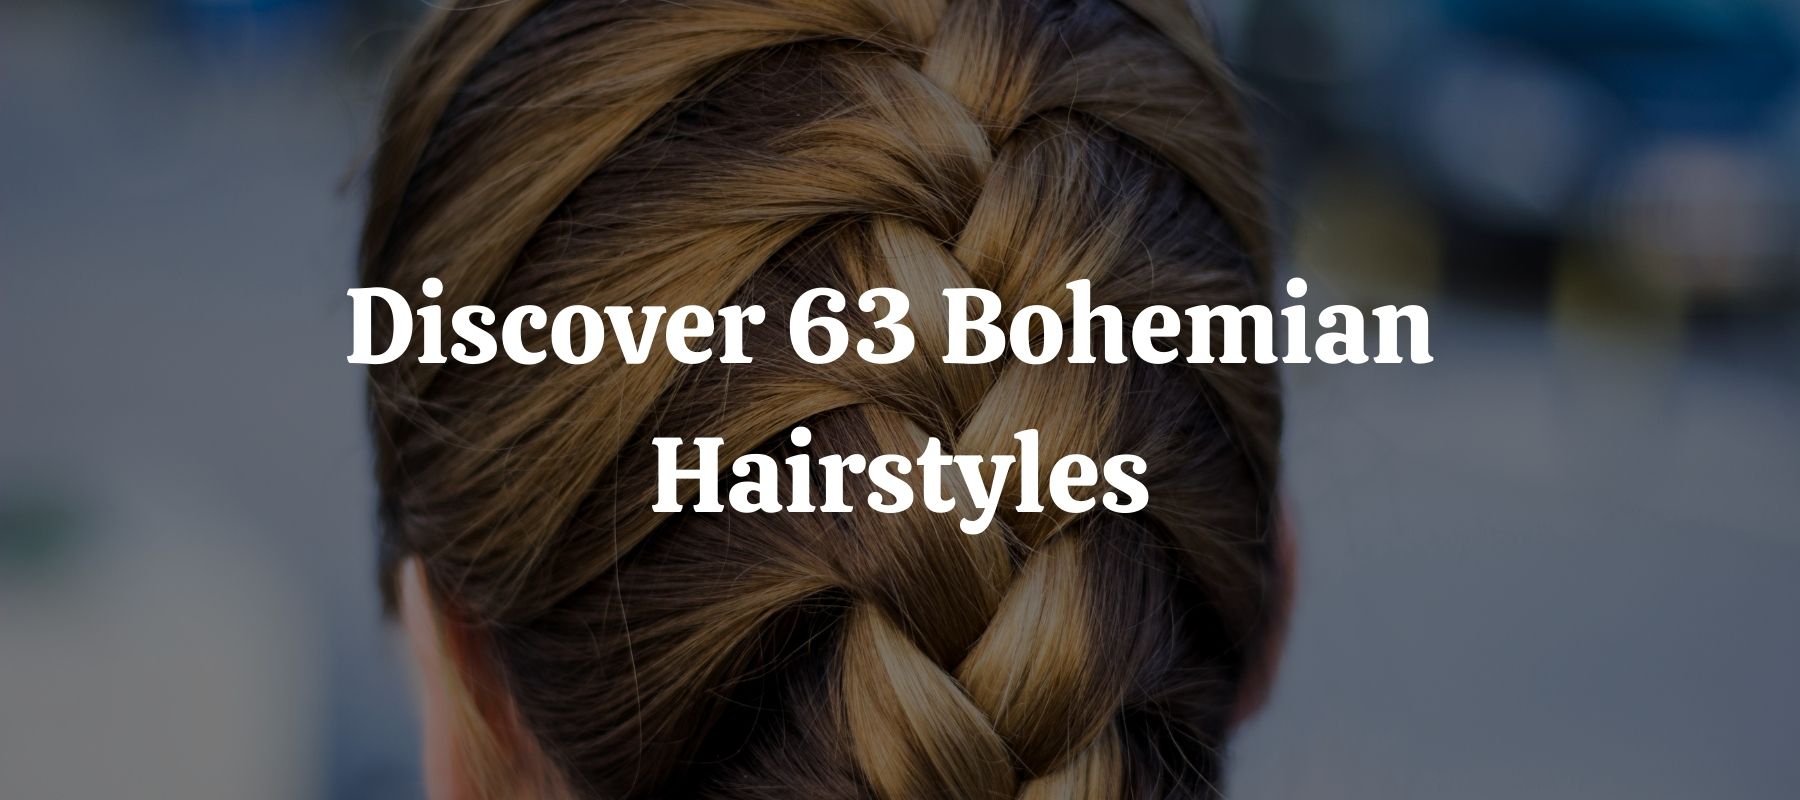 Discover 63 Bohemian Hairstyles